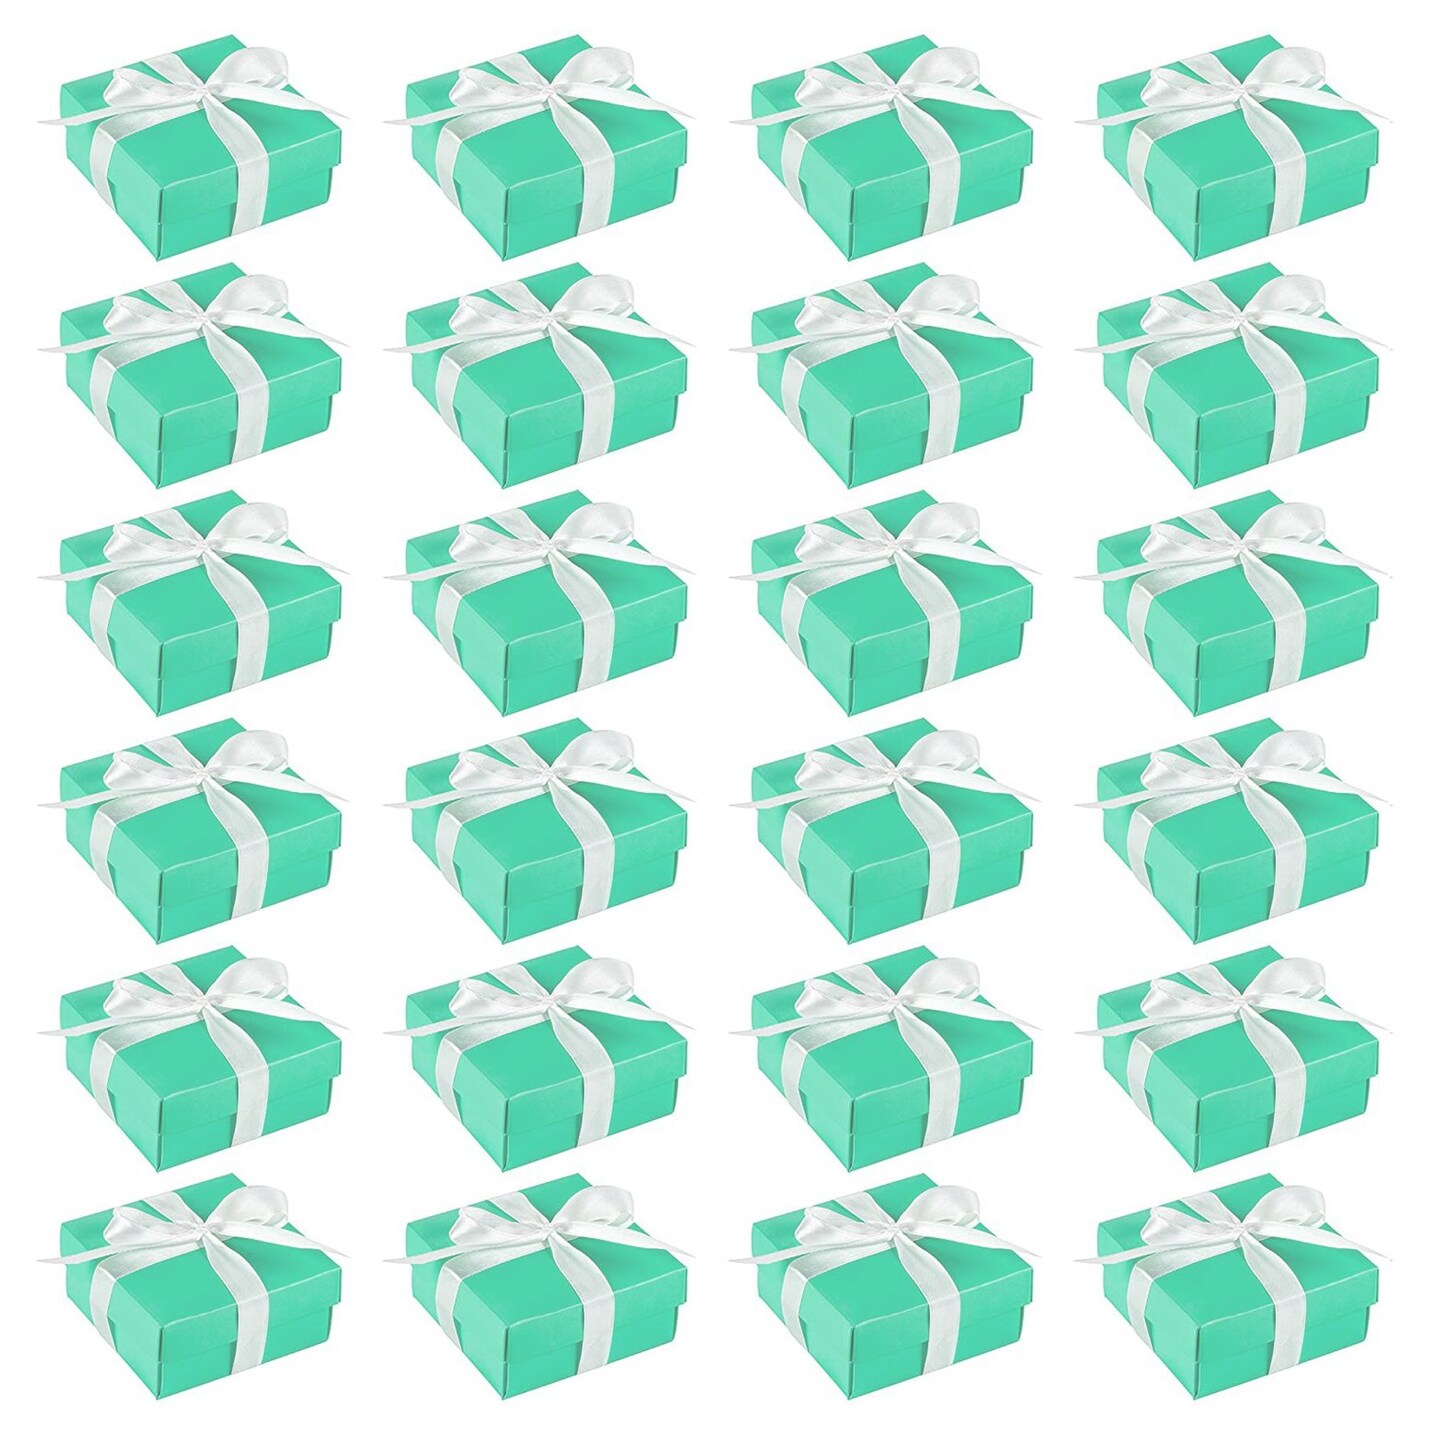 24 Pack Party Favor Boxes, Small Turquoise Candy Treat Gift Box for Bridal Shower Engagement Birthday Wedding